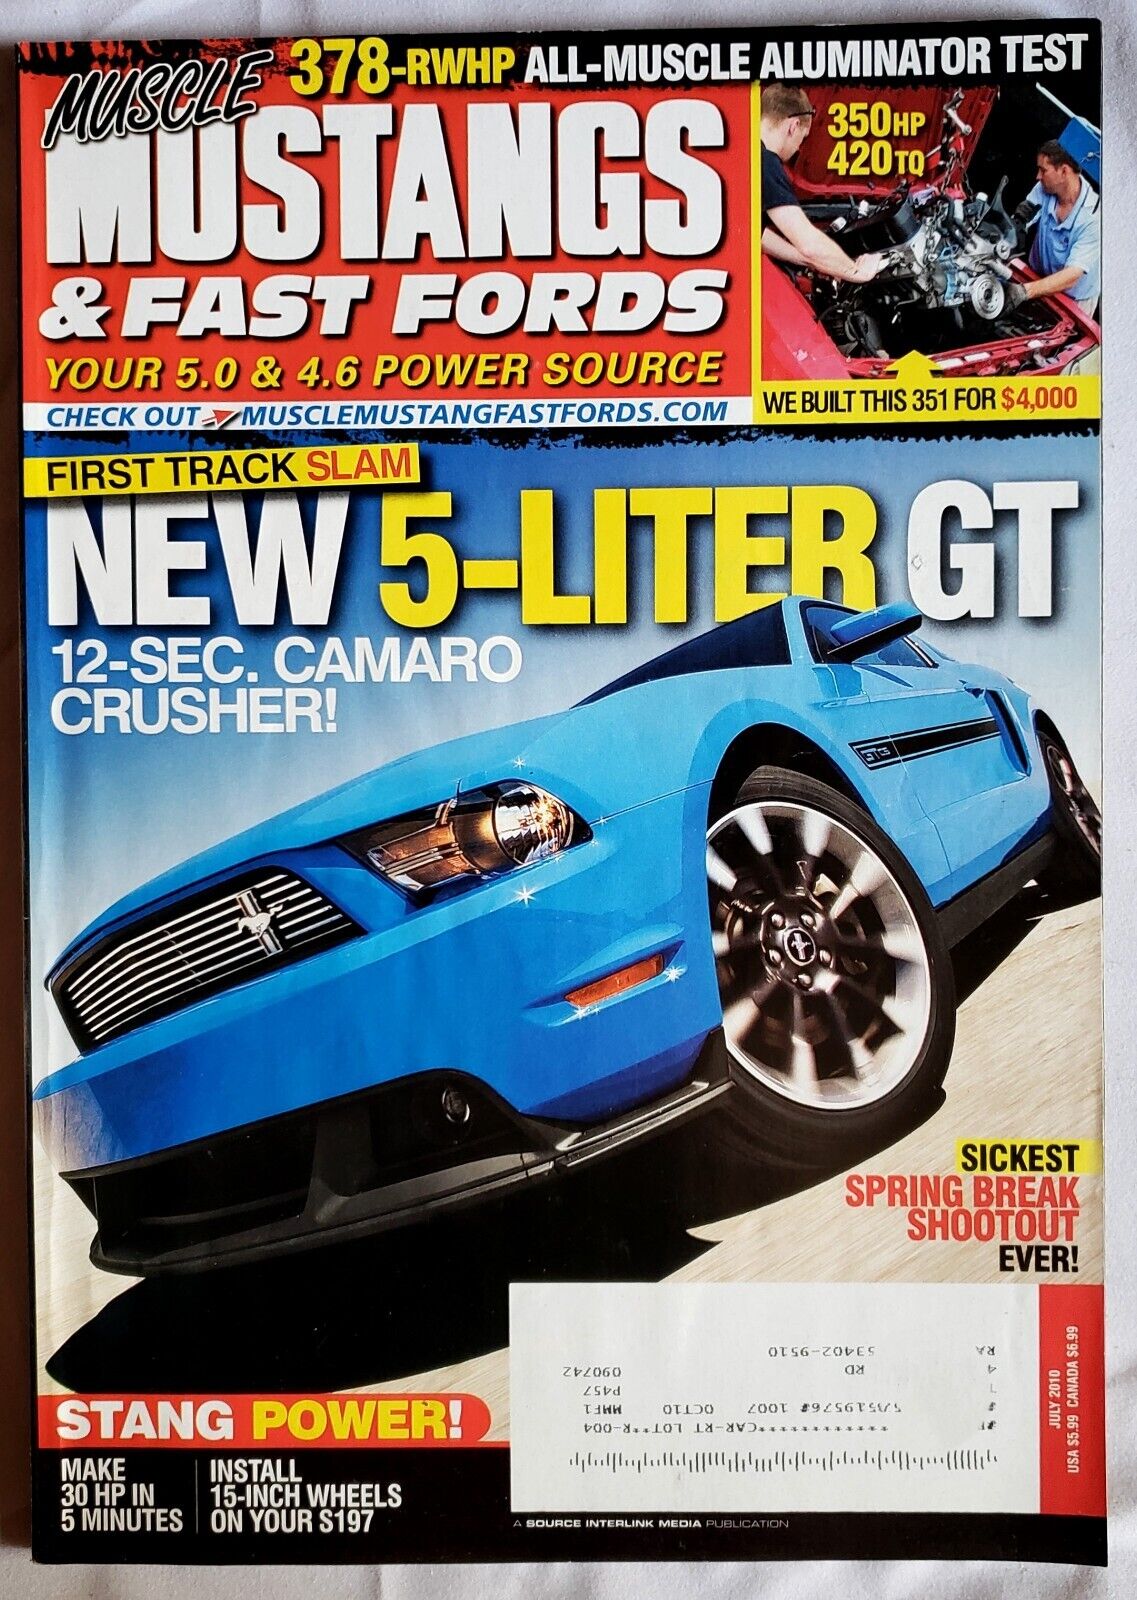 Muscle Mustangs & Fast Fords - 2010 July - Auto Car Performance Magazine